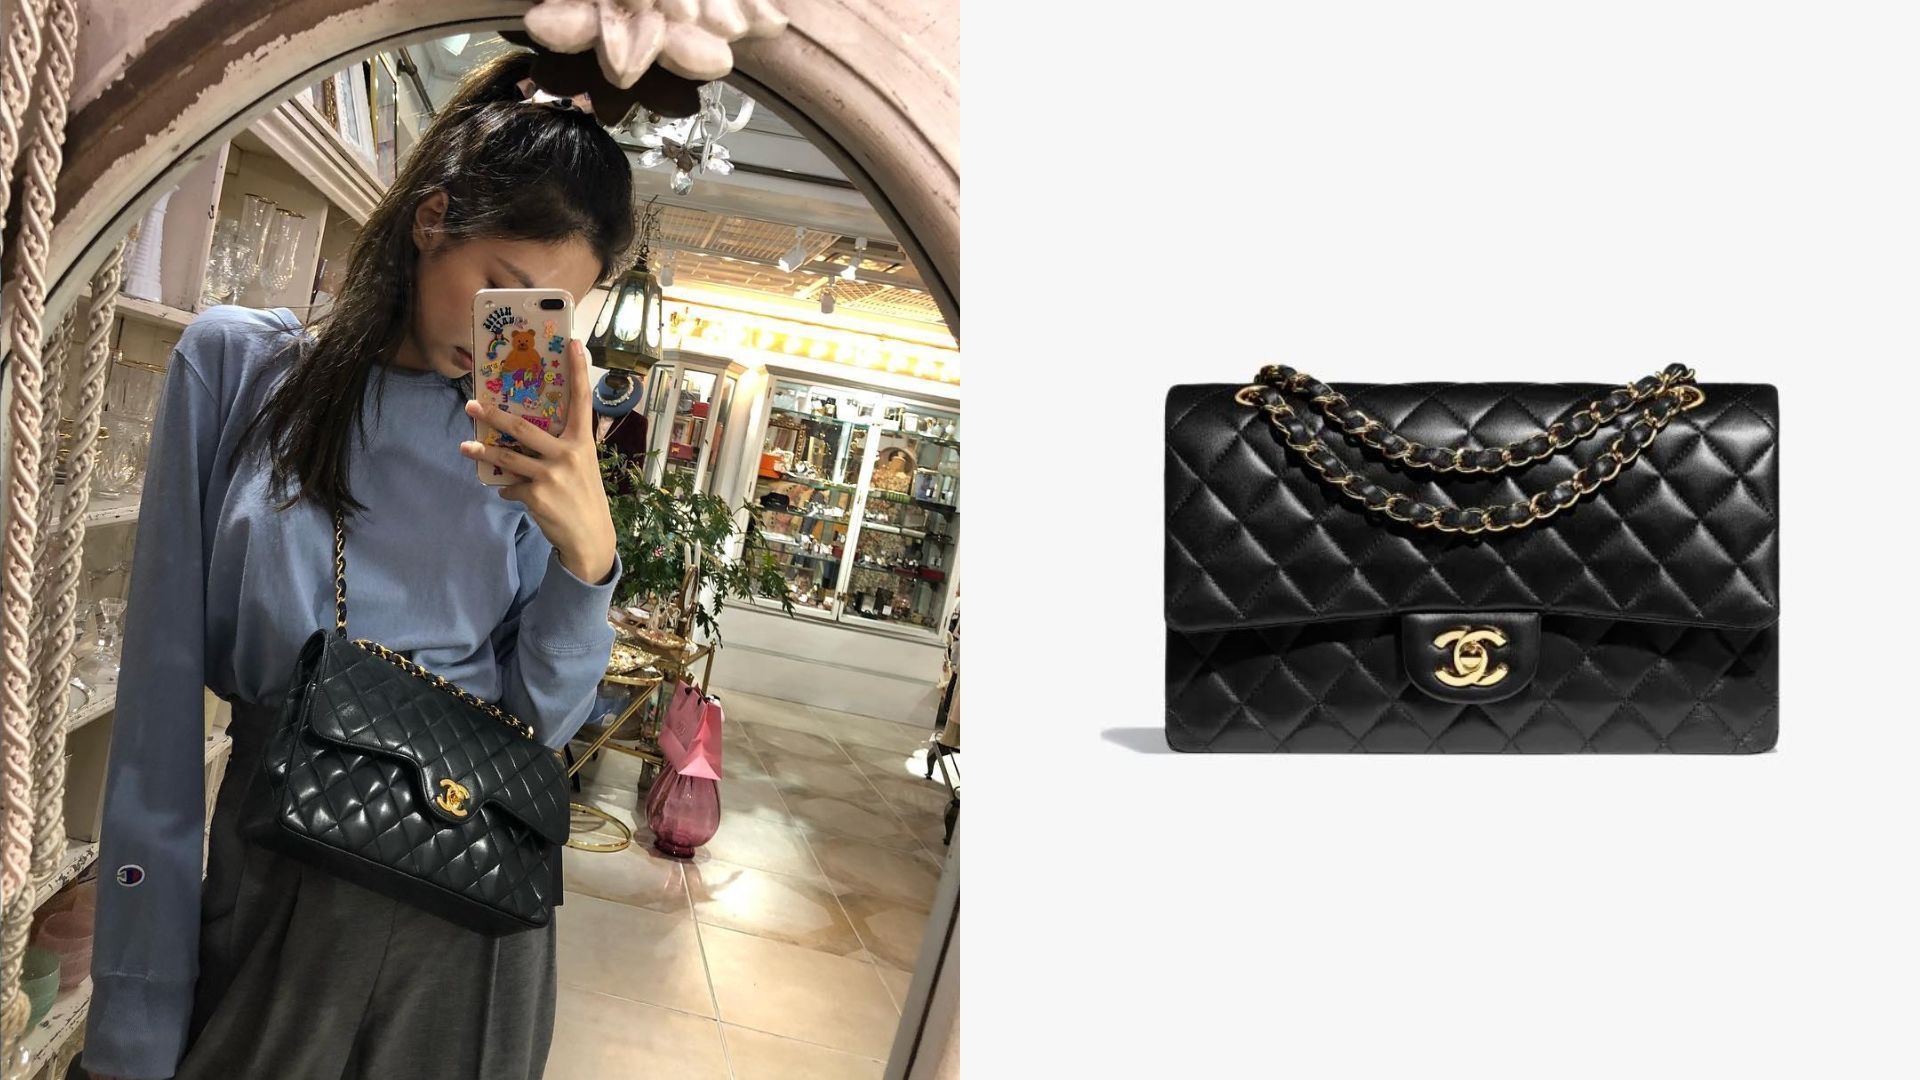 Check out the best Chanel bags owned by BLACKPINK's Jennie